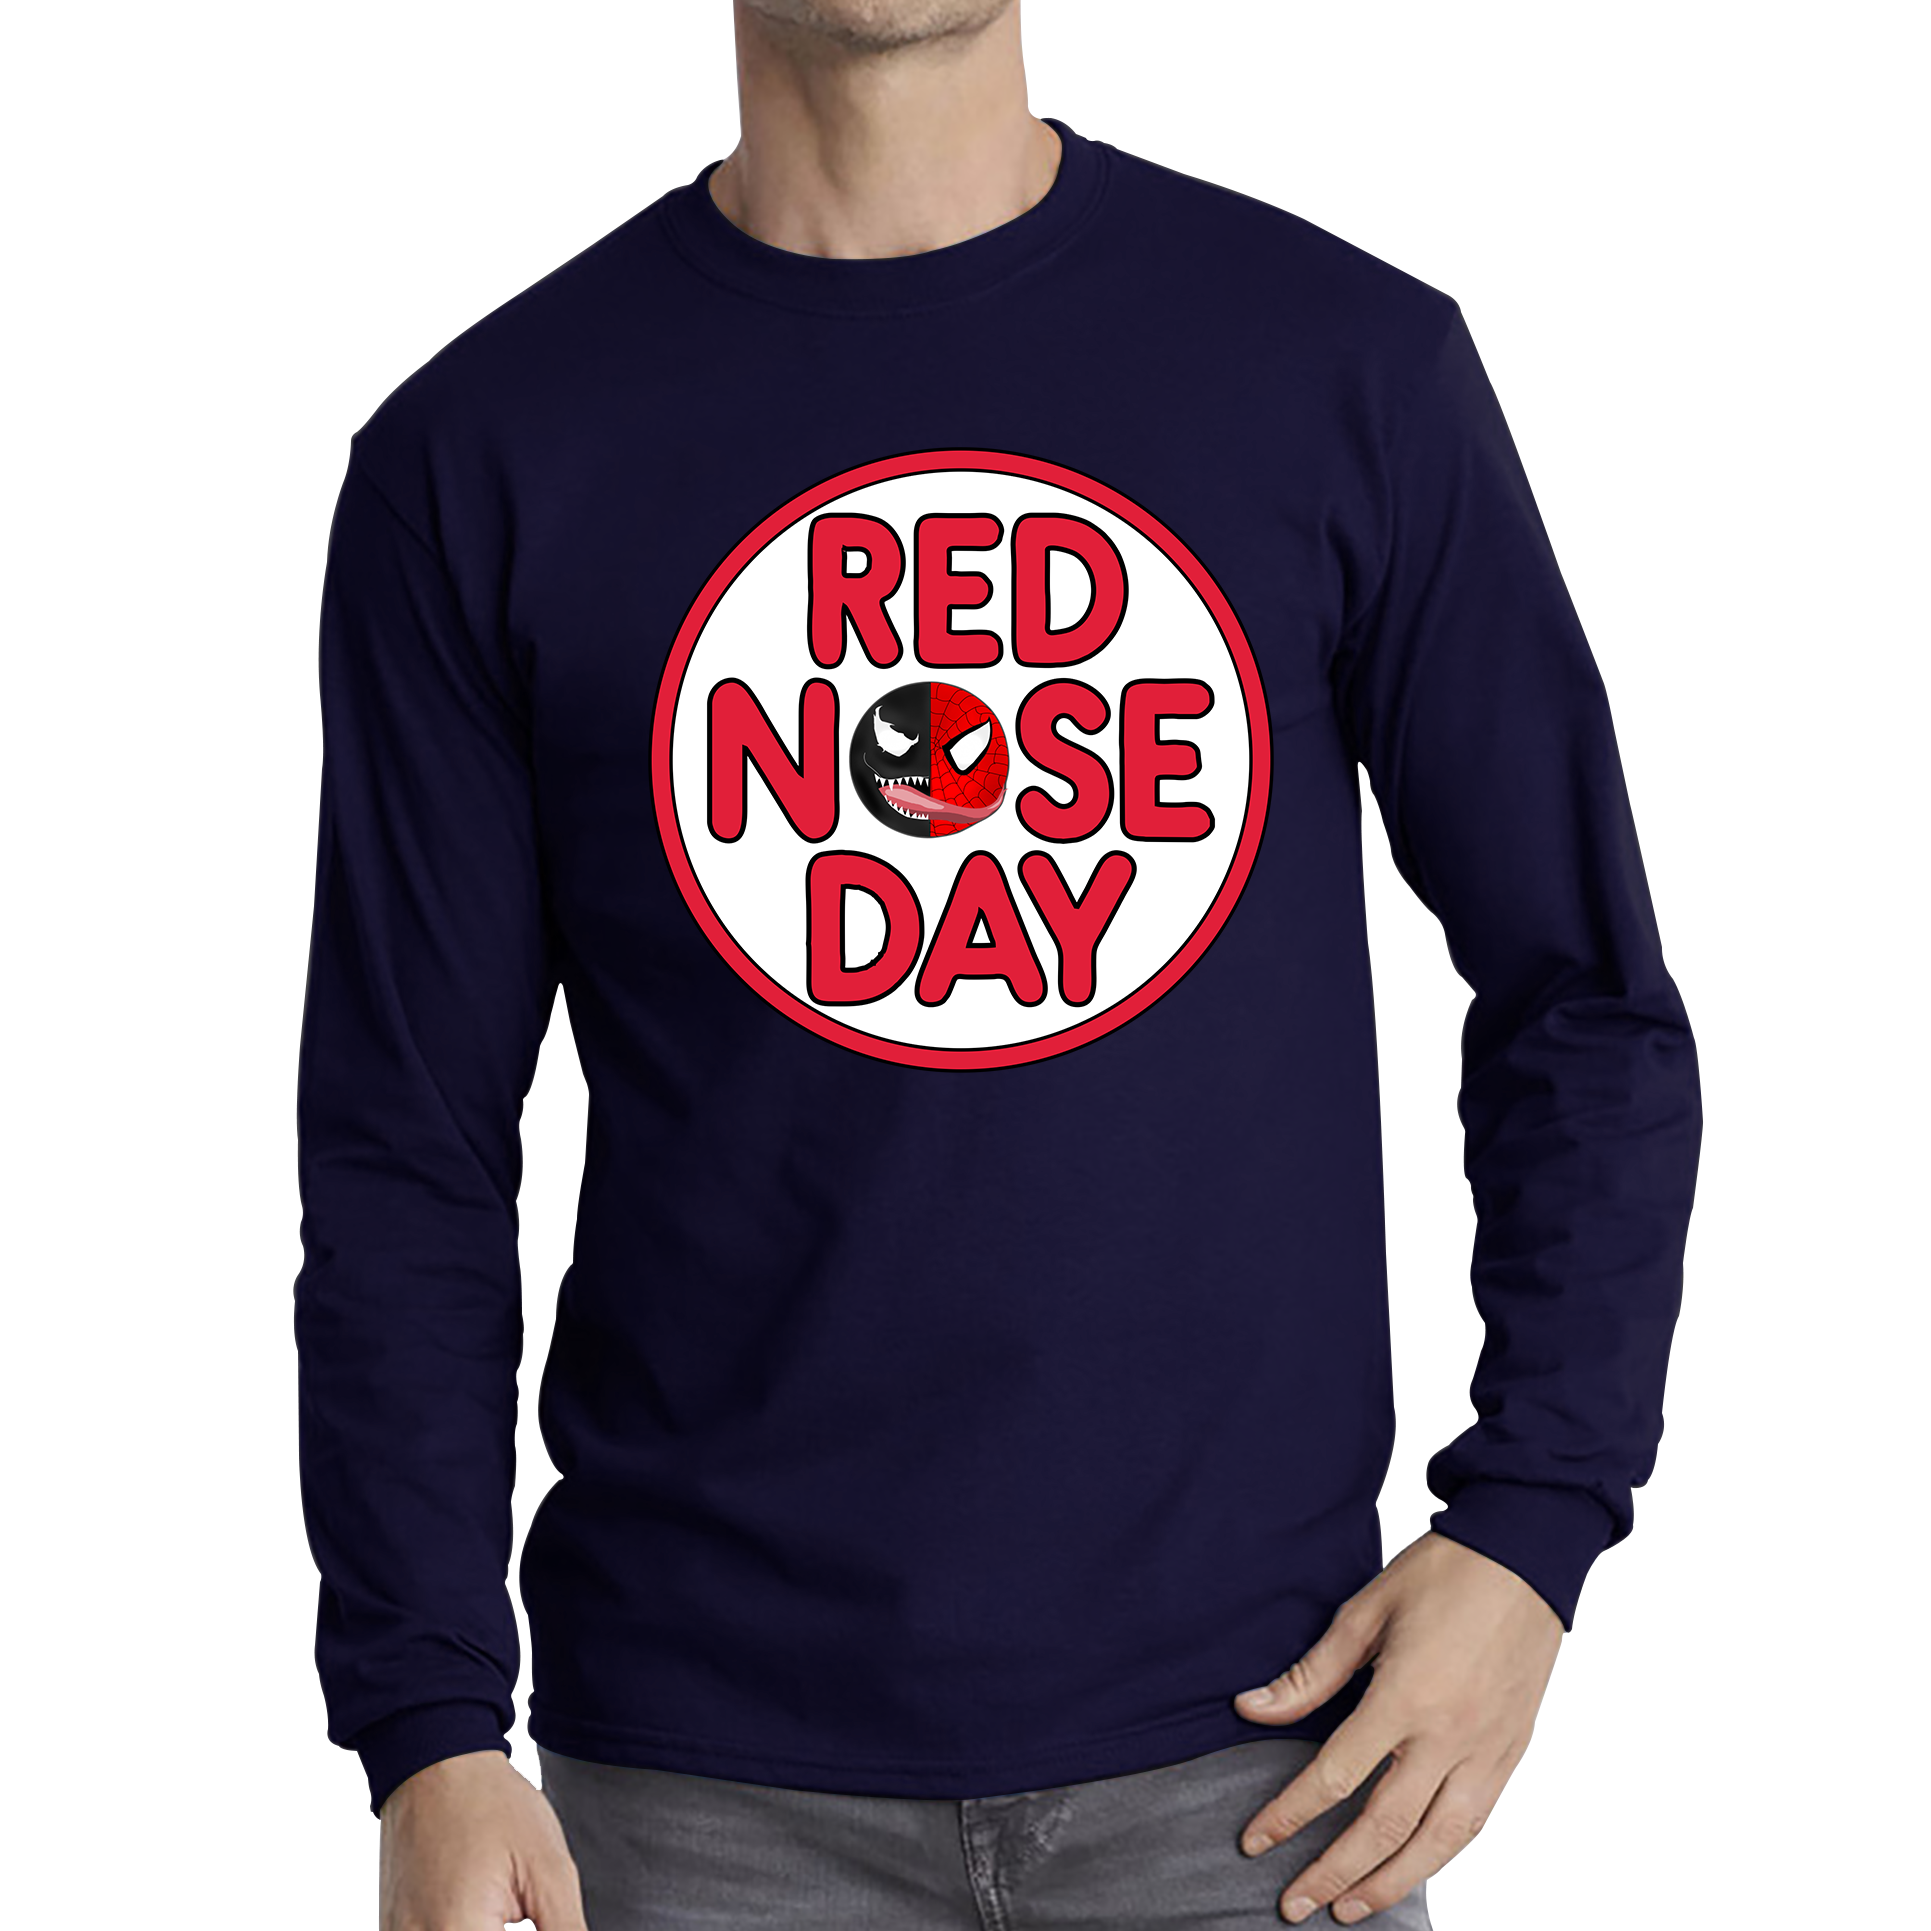 Marvel Venom Spiderman Red Nose Day Adult Long Sleeve T Shirt. 50% Goes To Charity